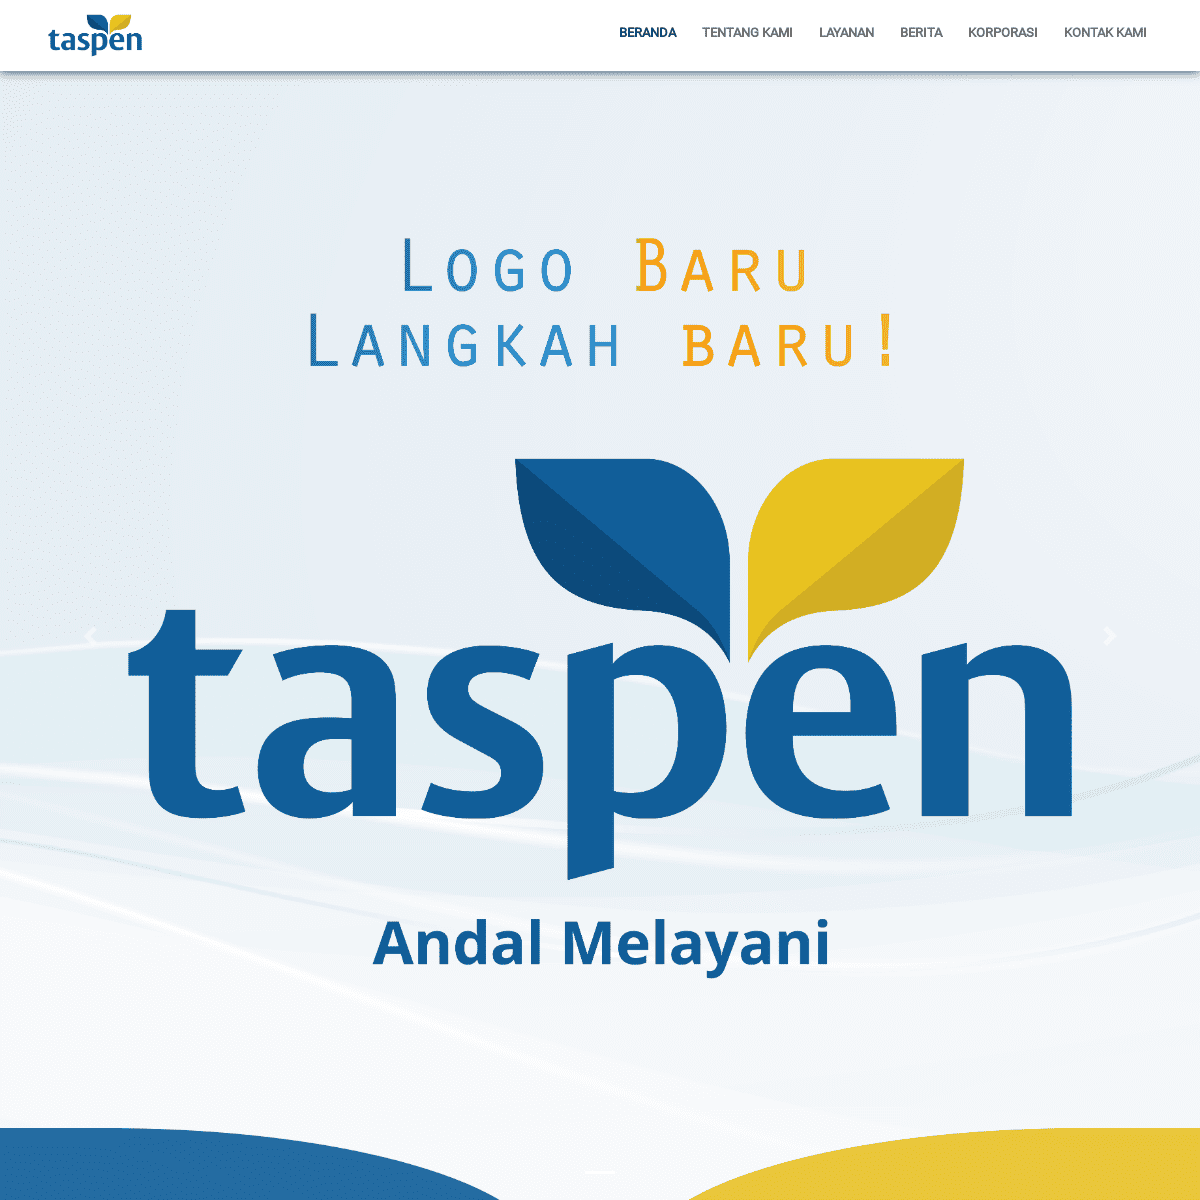 A complete backup of taspen.co.id